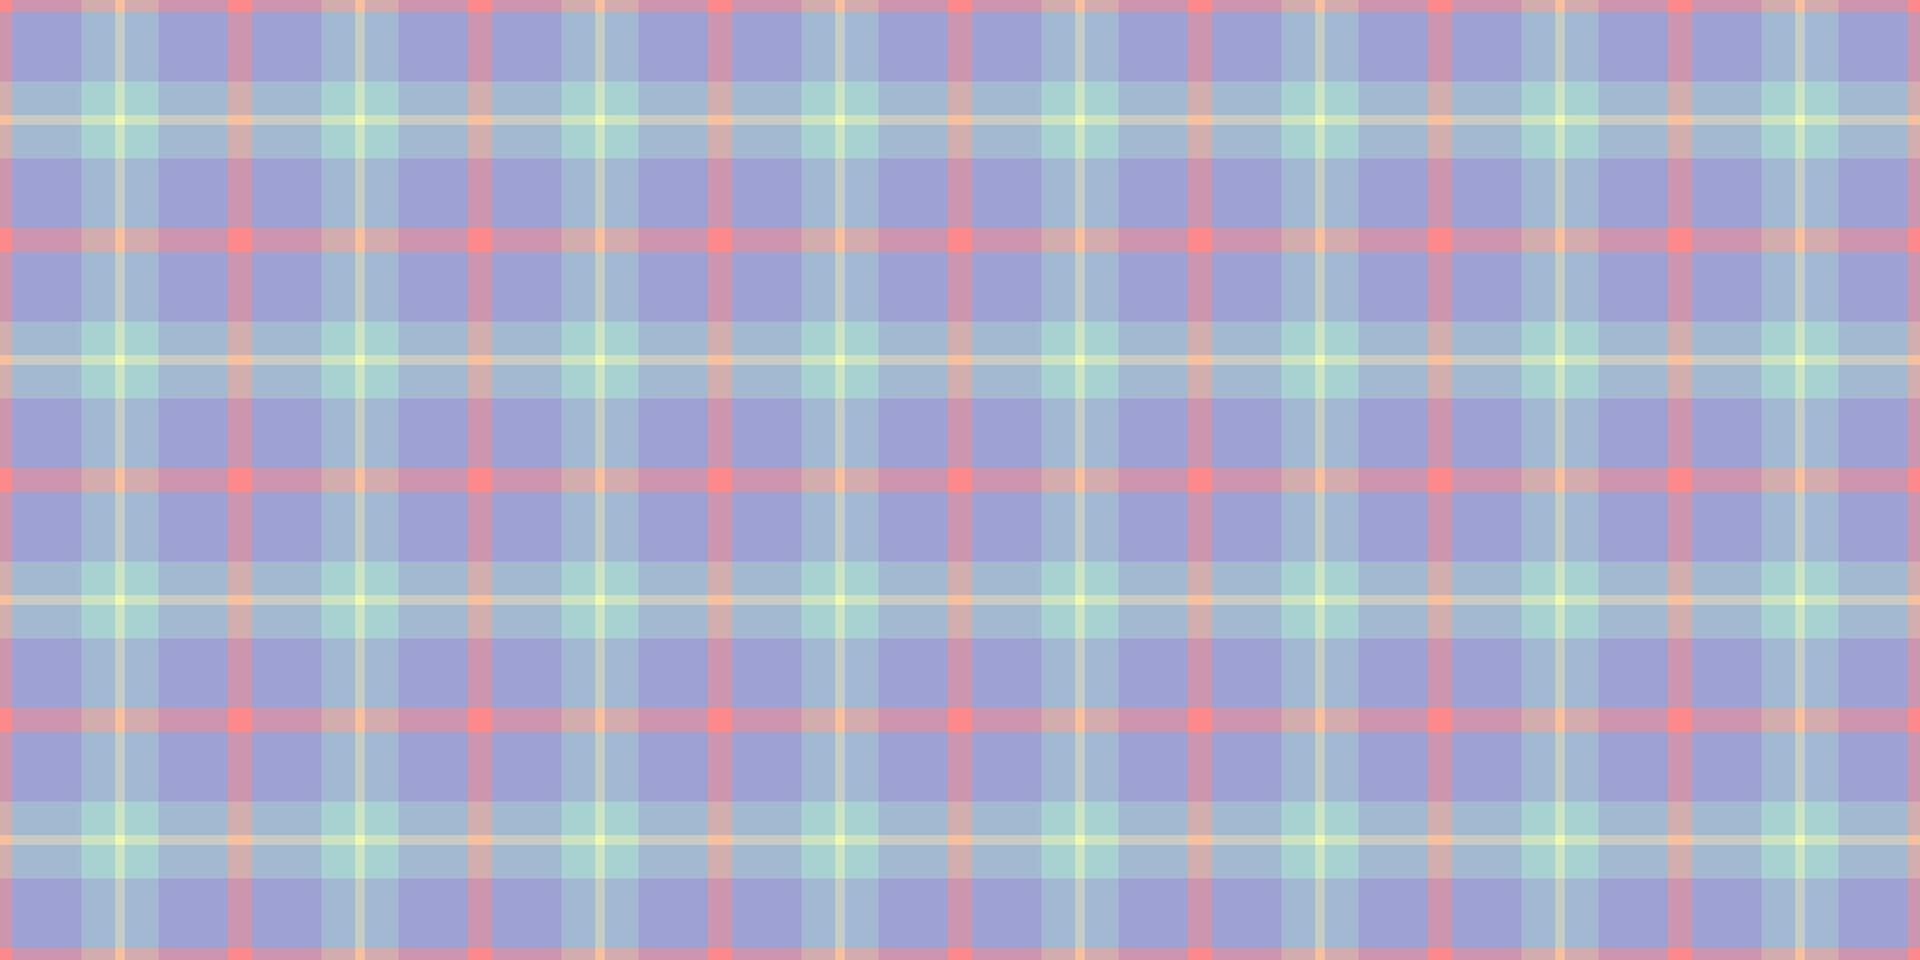 Brazil tartan plaid pattern, mockup fabric seamless textile. Pyjamas vector background texture check in light and pastel grey colors.